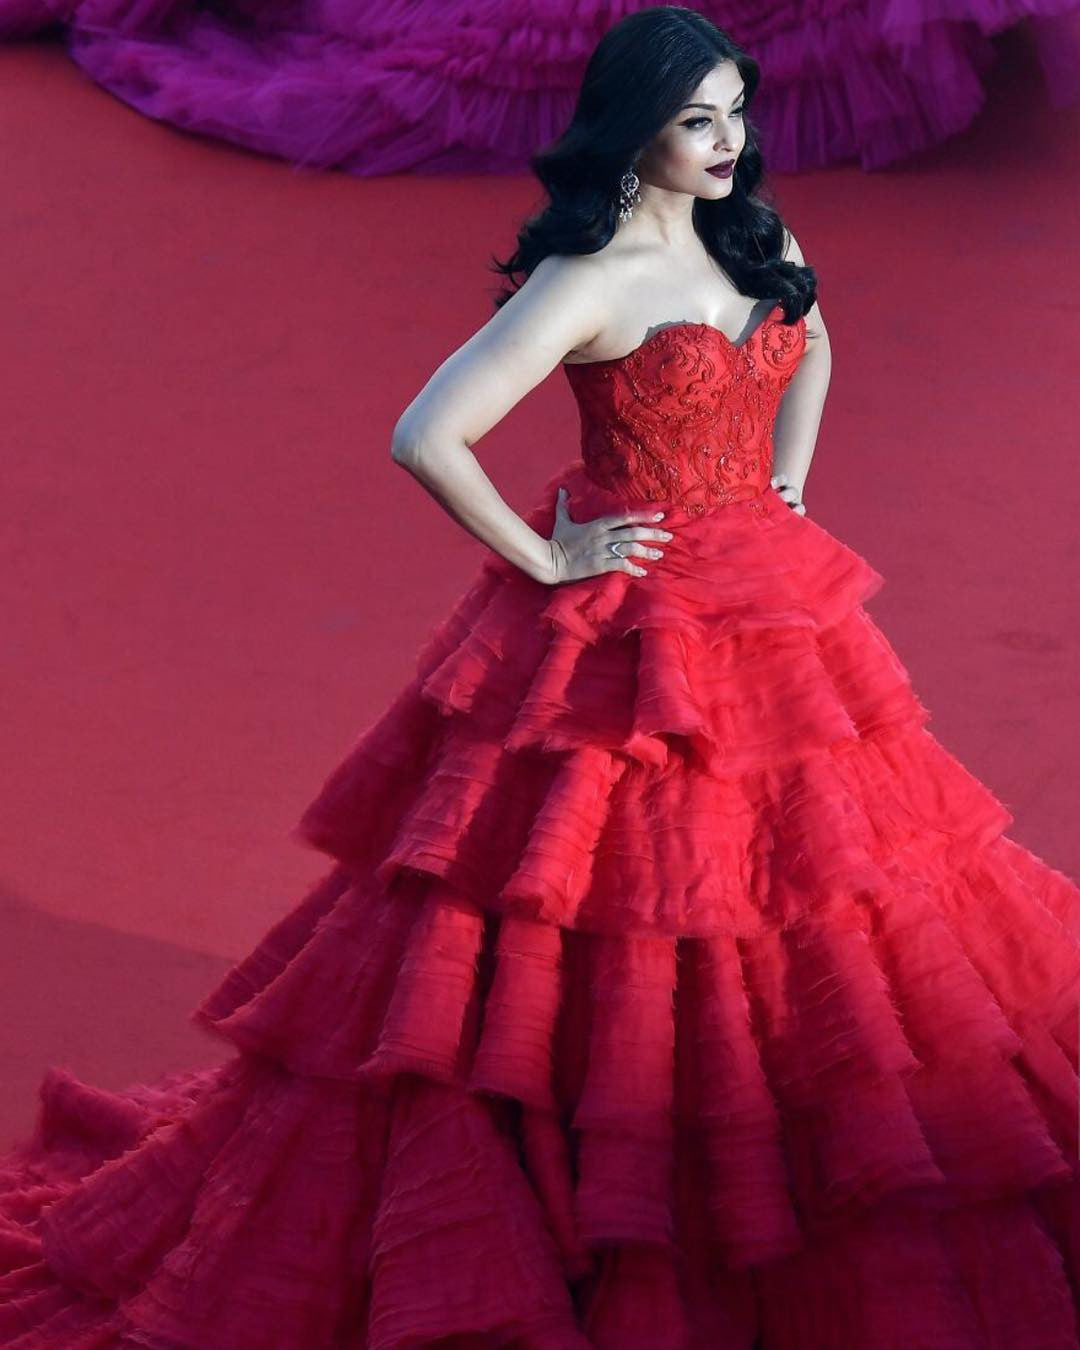 Aishwarya Rai Bachchan Looked Like A Barbie Doll In Ralph & Russo’s Multi-Layered Red Gown  At Cannes Film Festival